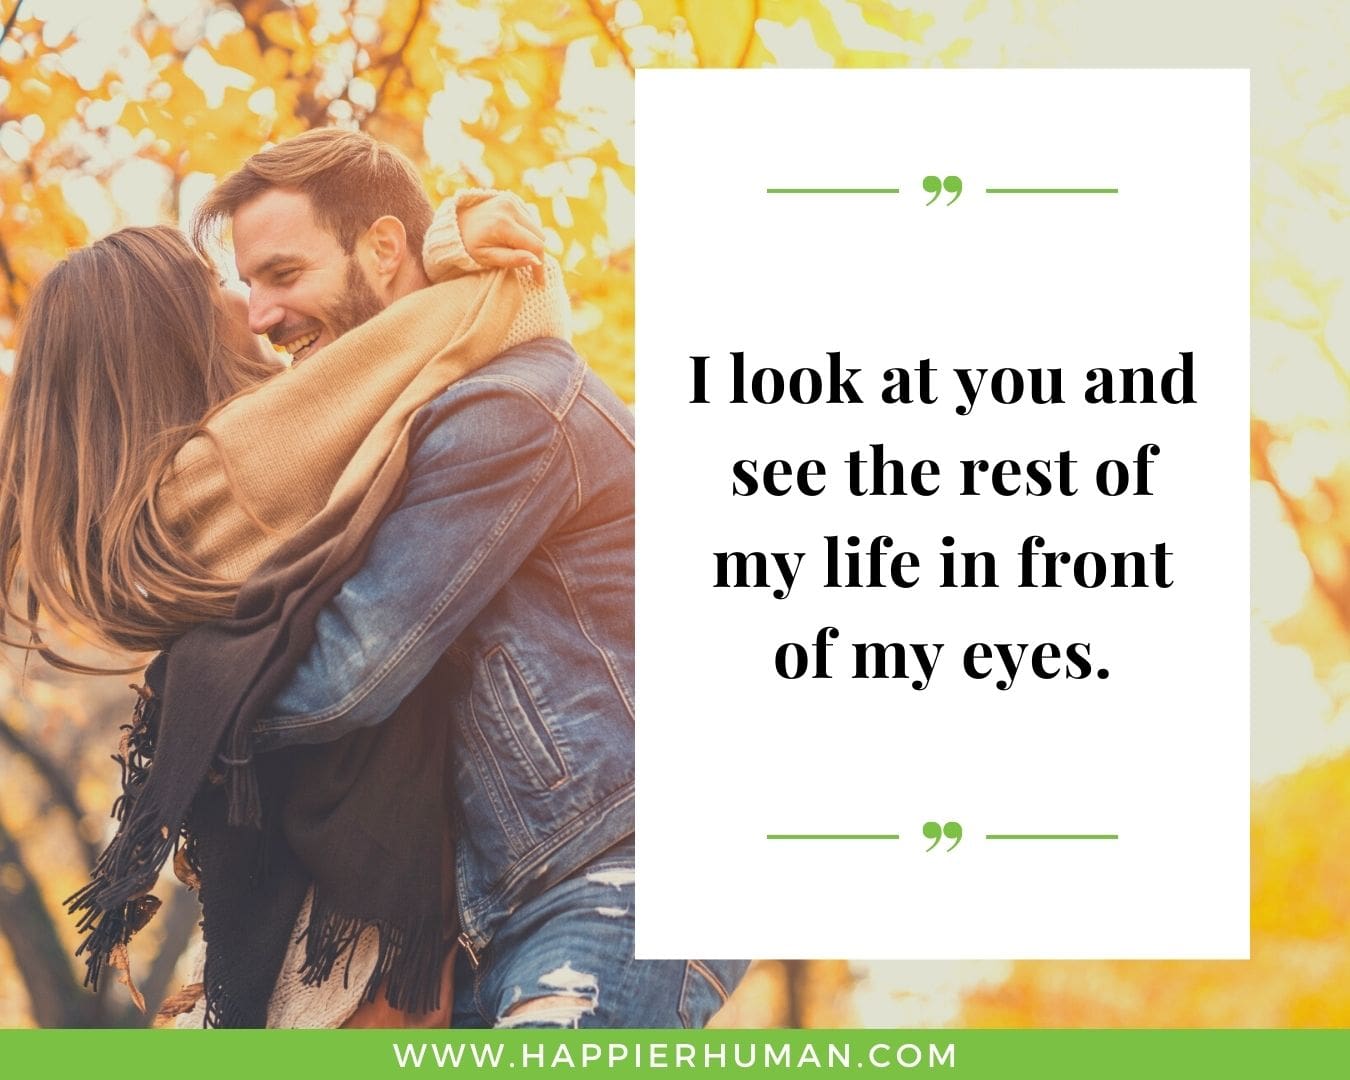 Love Quotes for women “I look at you and see the rest of my life in front of my eyes.”